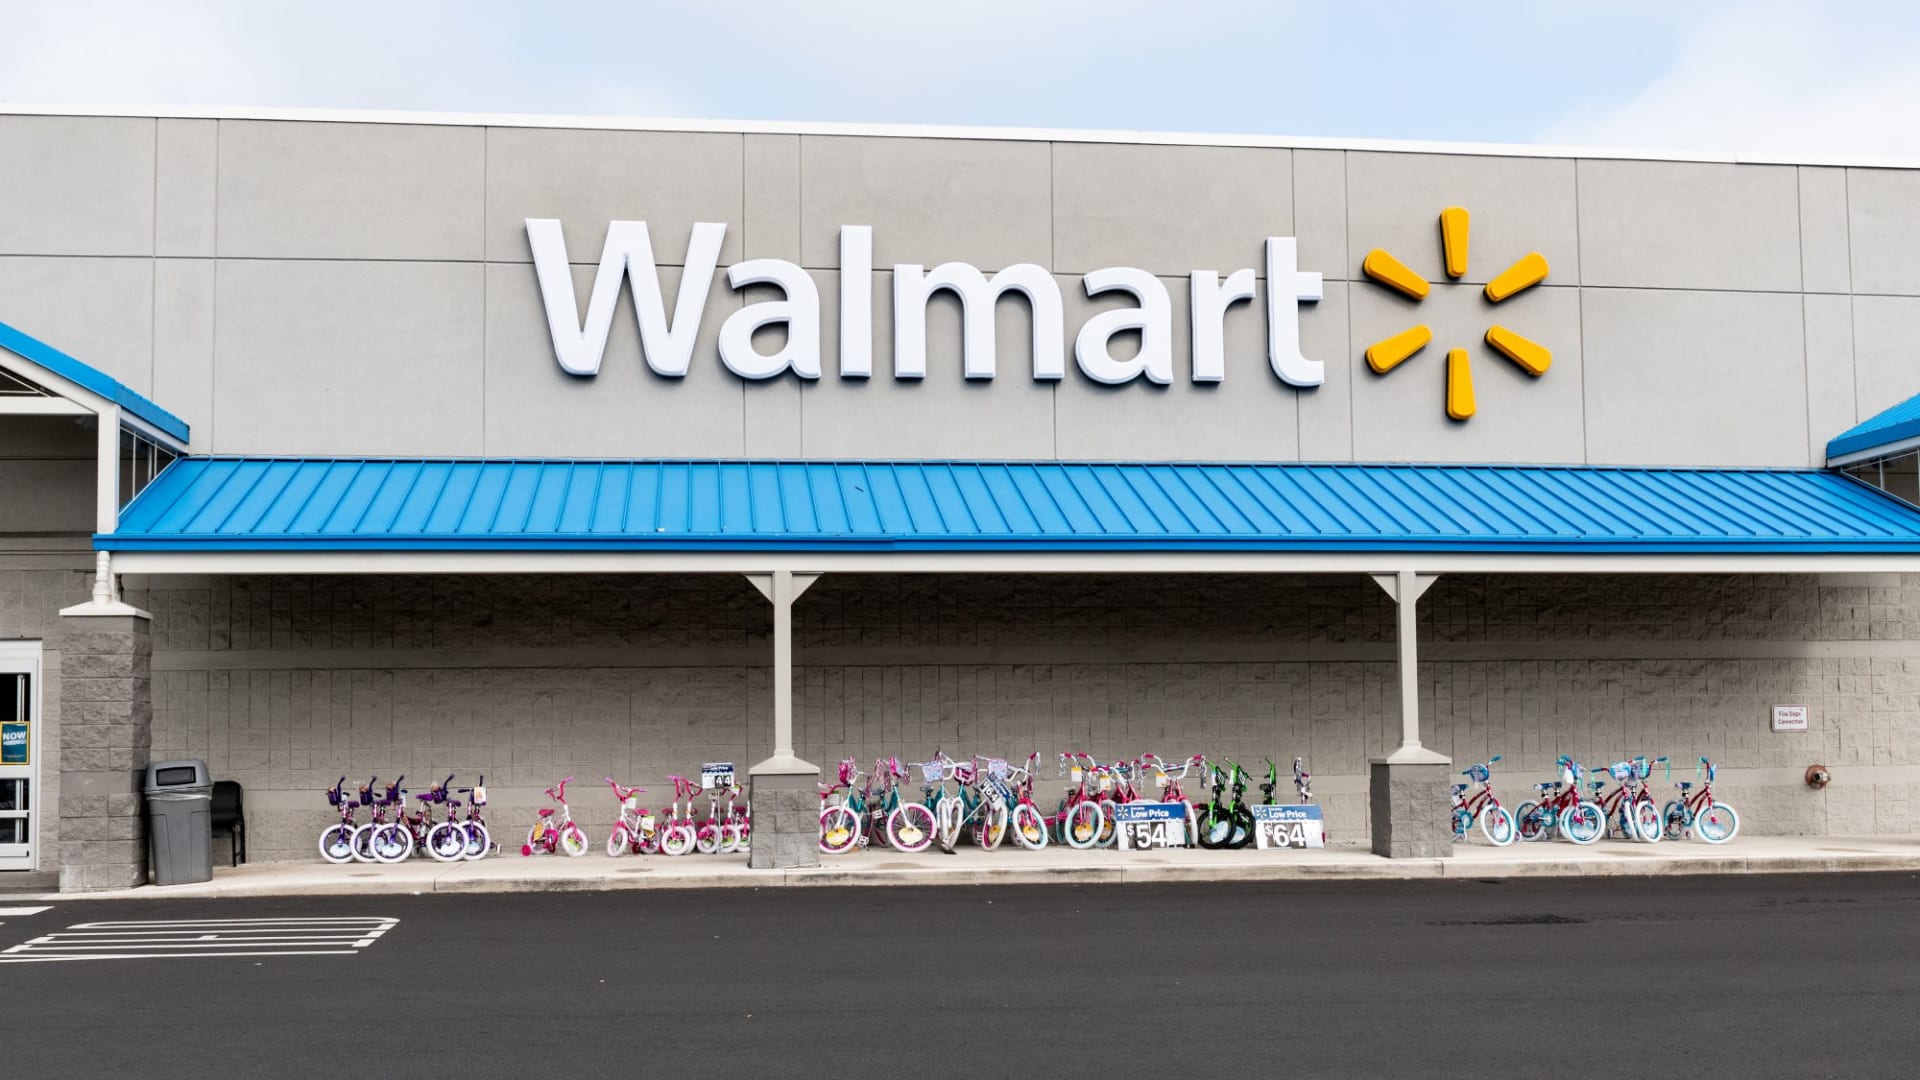 Walmart Just Made a Huge Announcement. Here's the Key Thing Everyone Missed